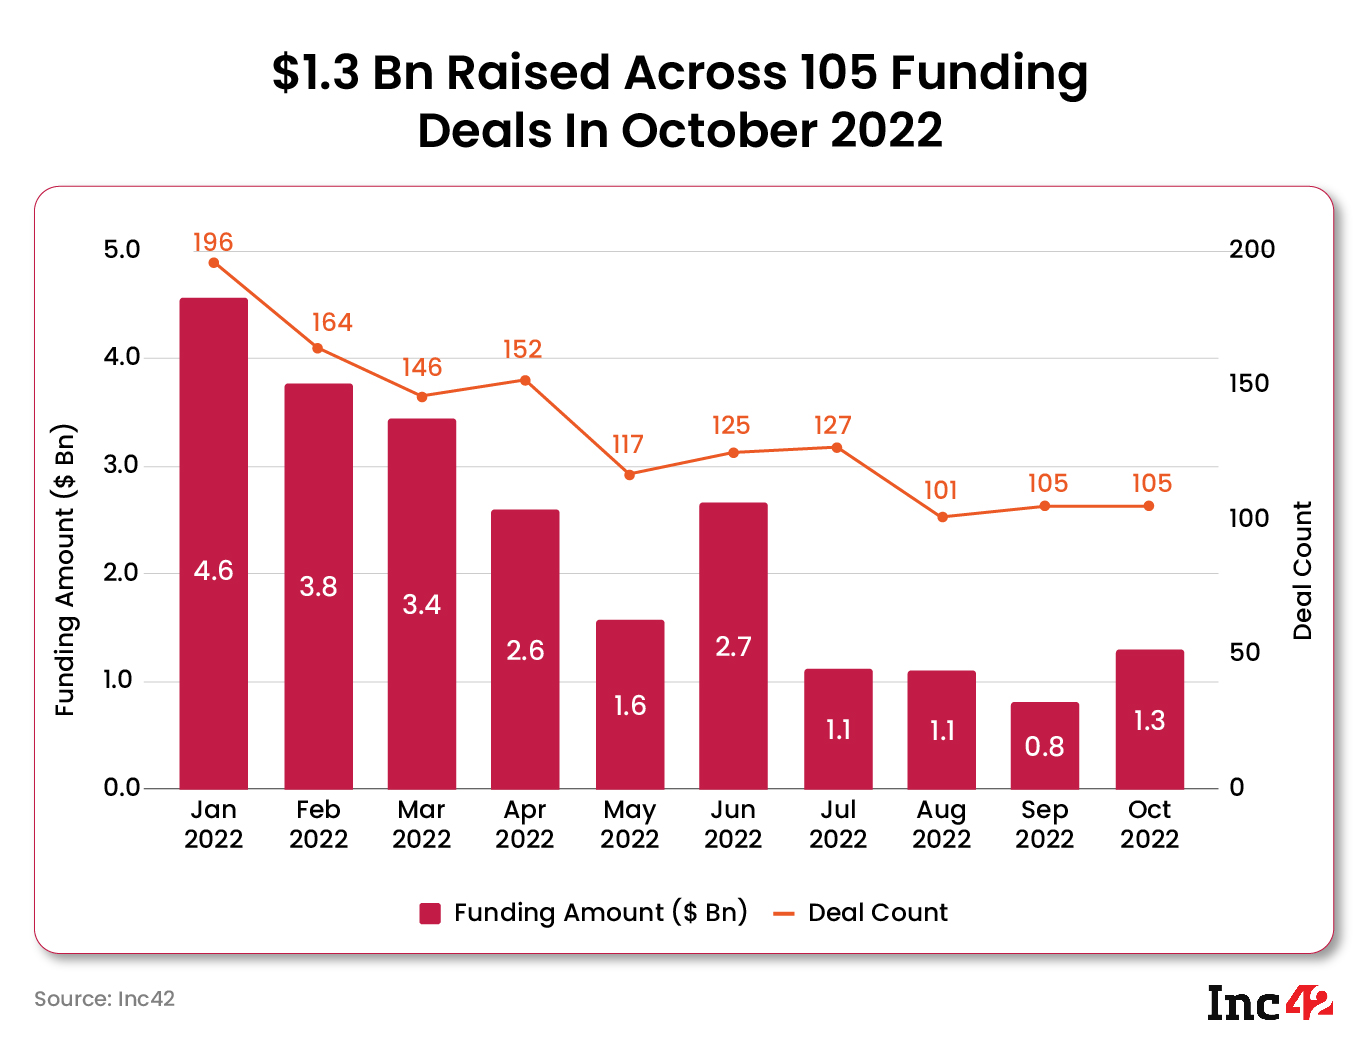 Monthly funding reduced in October 2022